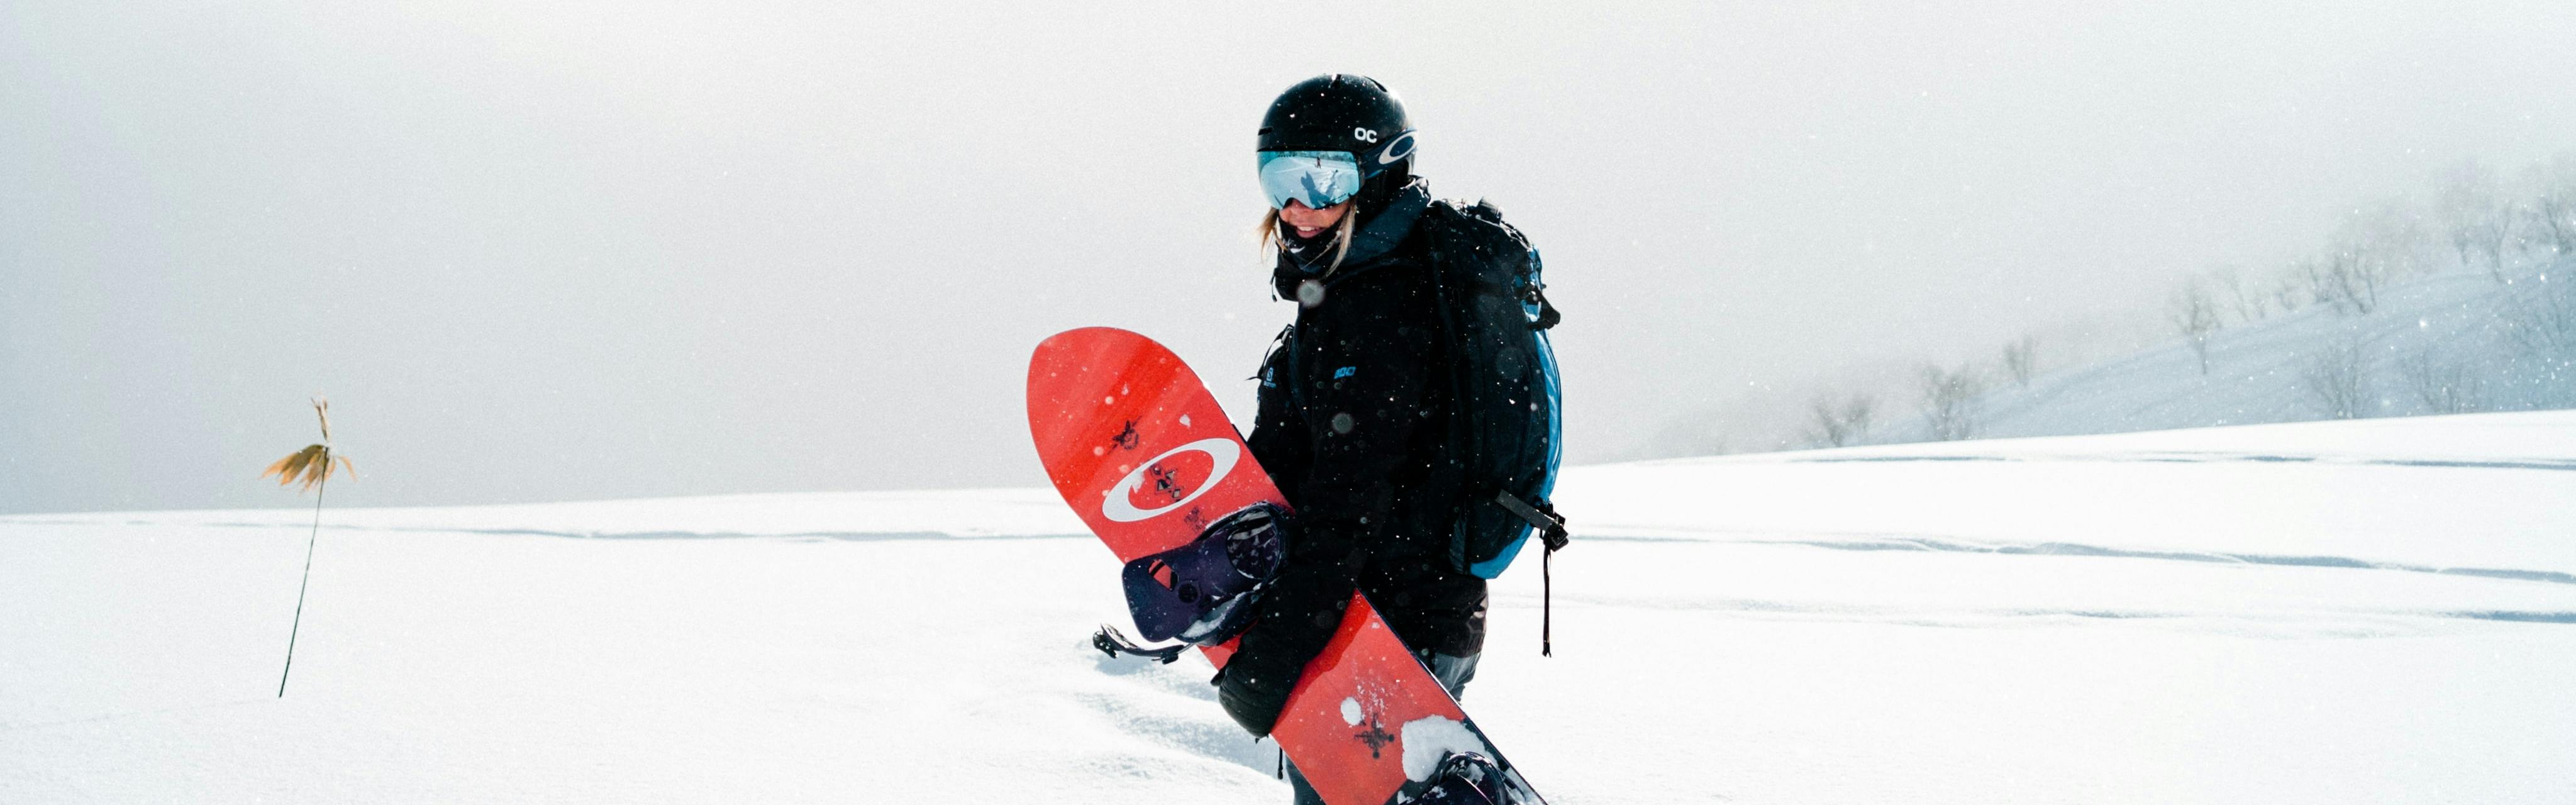 A woman stands and looks back at the camera while carrying a red snowboard and reflective goggles. The landscape around her is totally white and snowy.